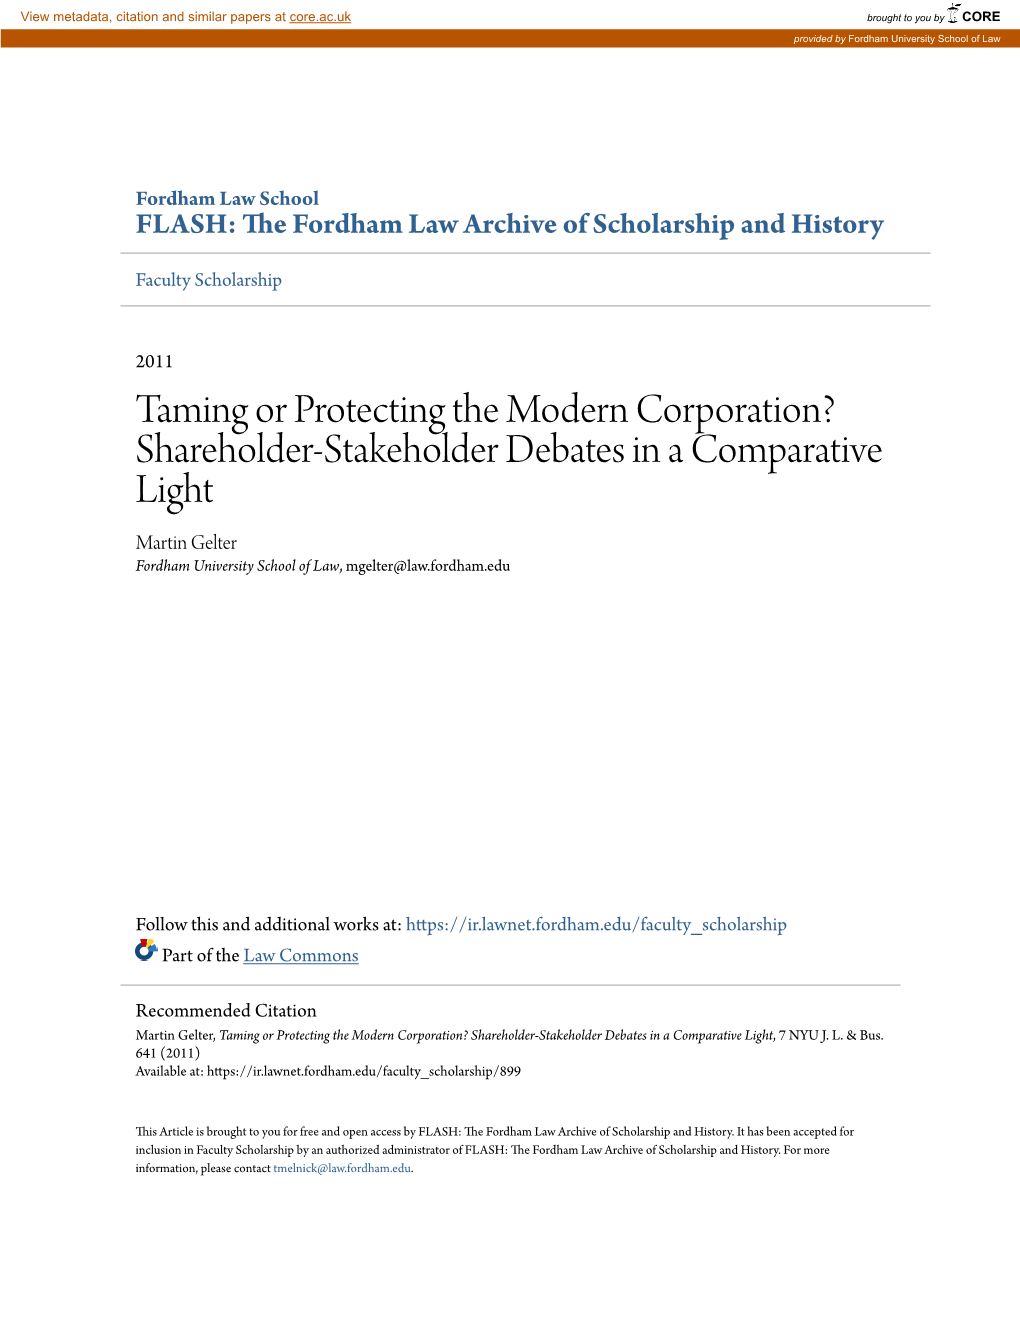 Taming Or Protecting the Modern Corporation?